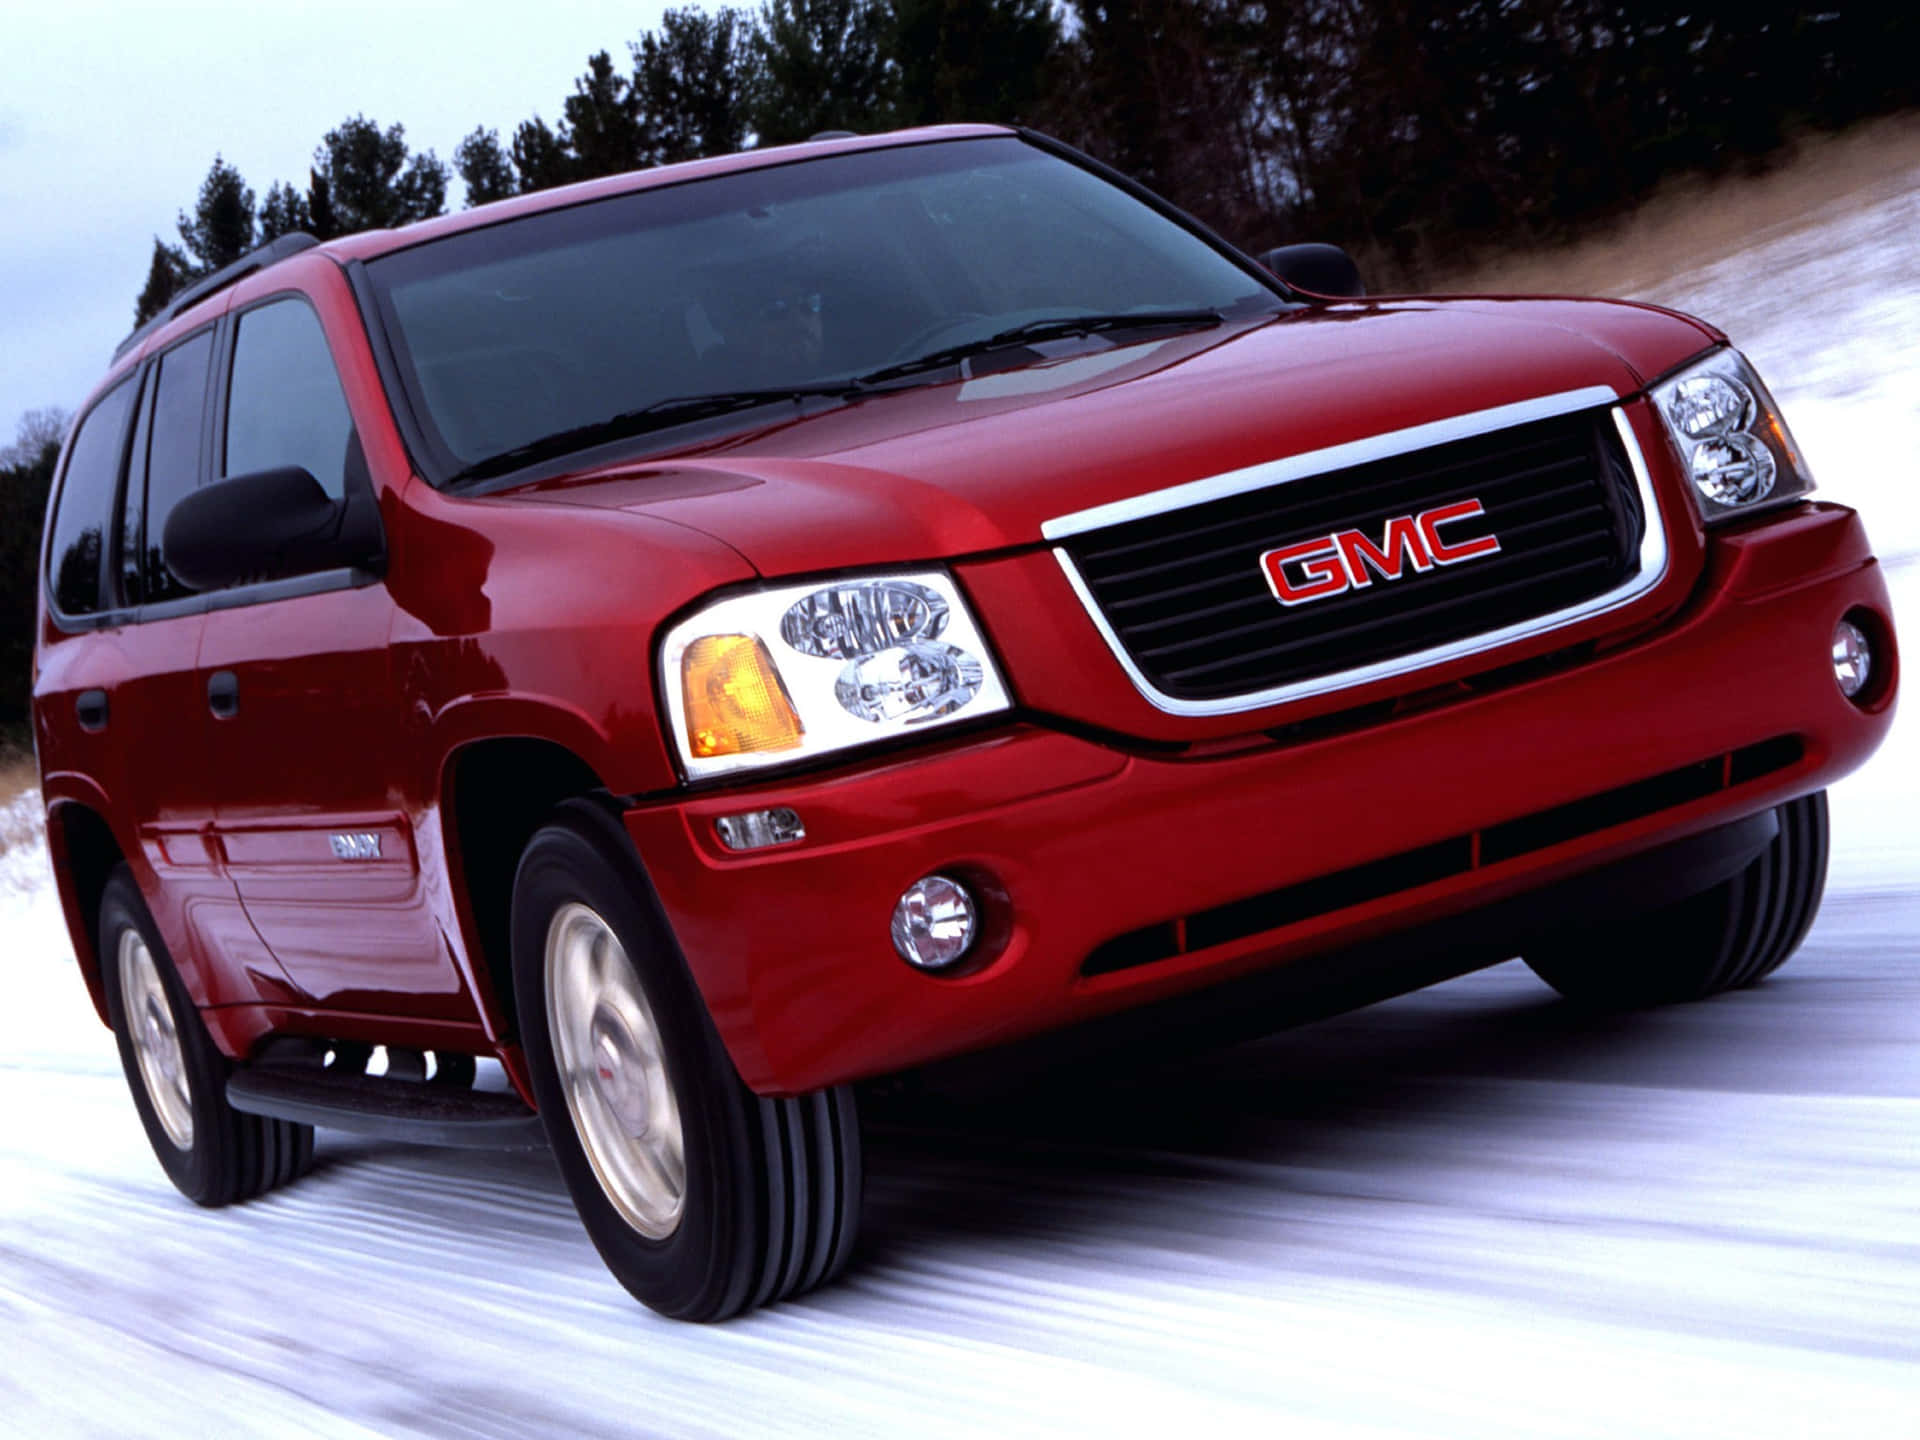 Stylish GMC Envoy in black on a scenic mountain road Wallpaper